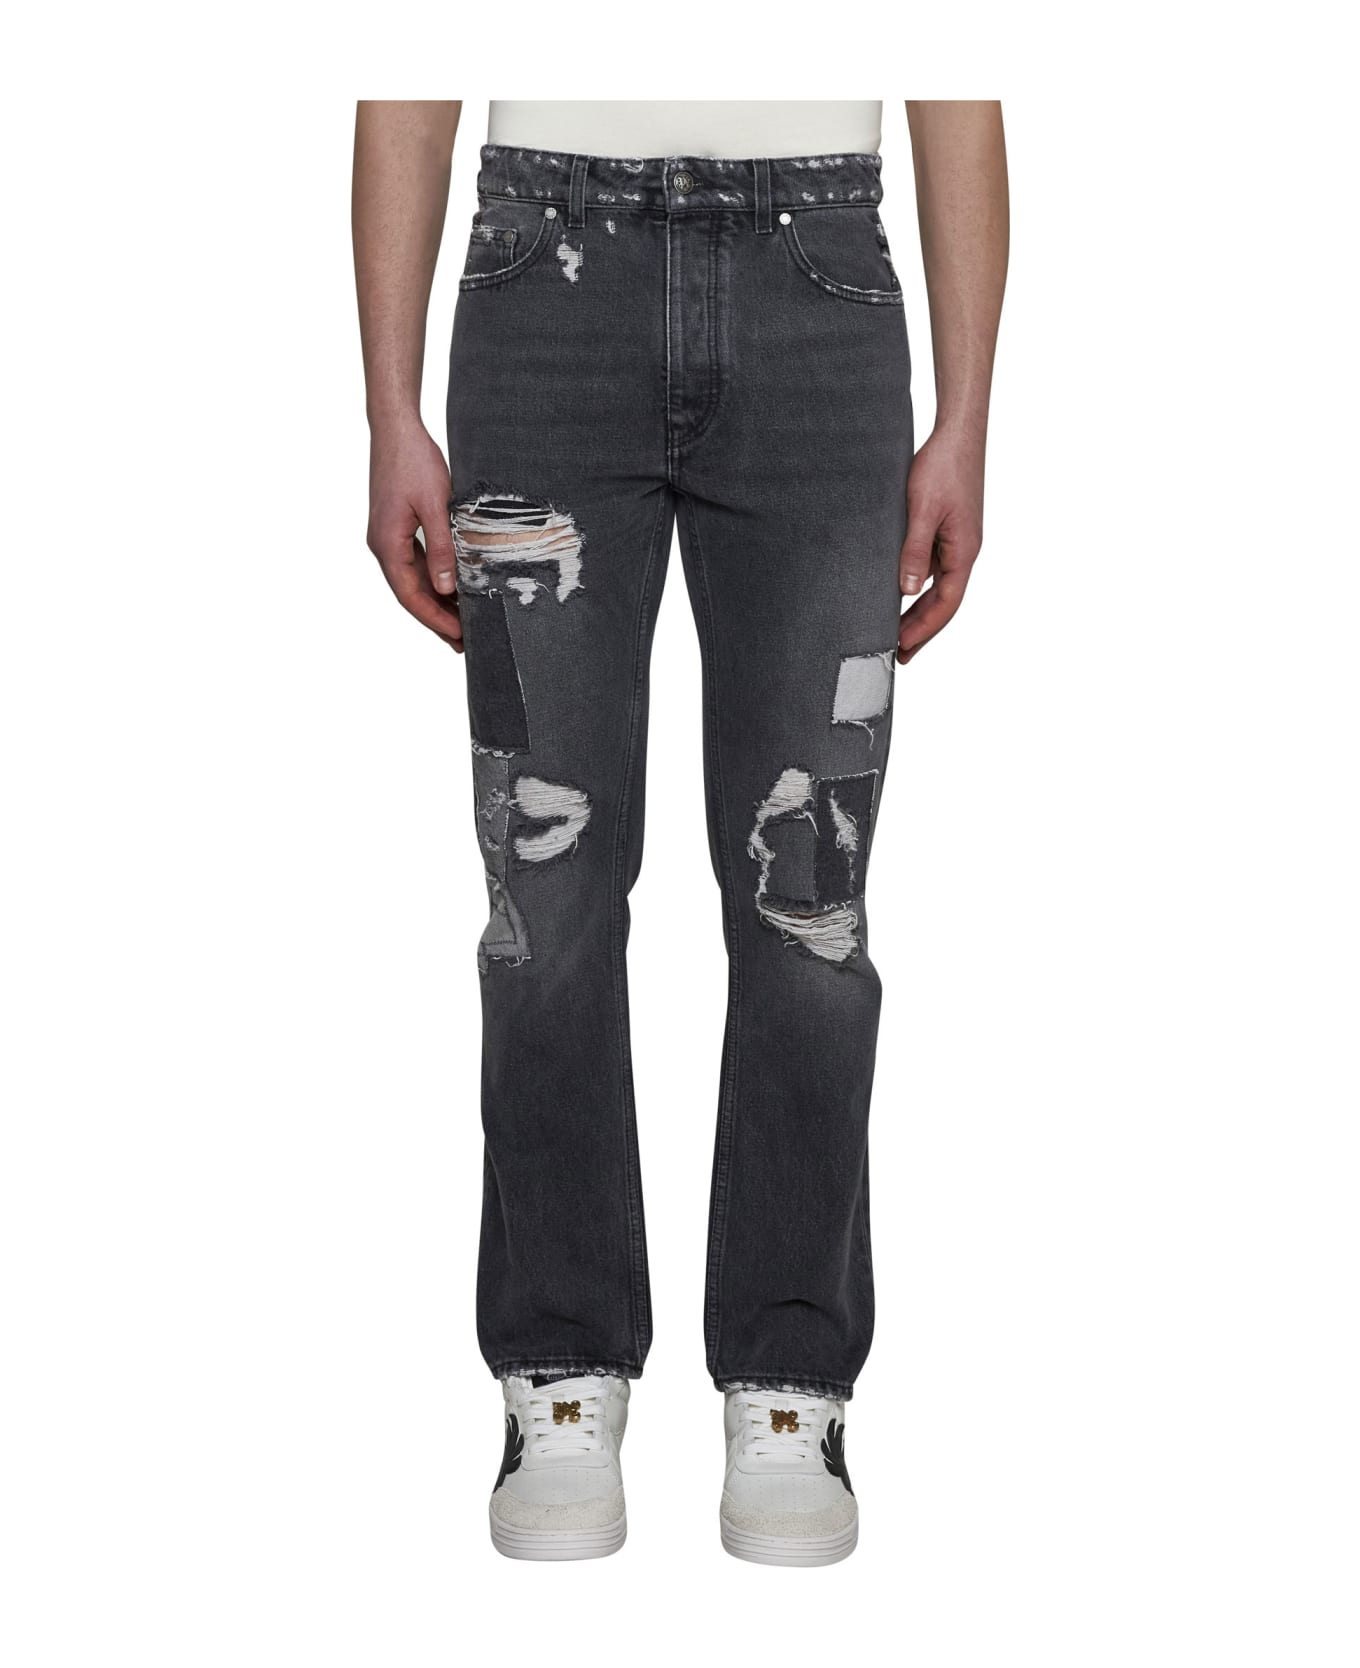 Palm Angels Destroyed Jeans - grey